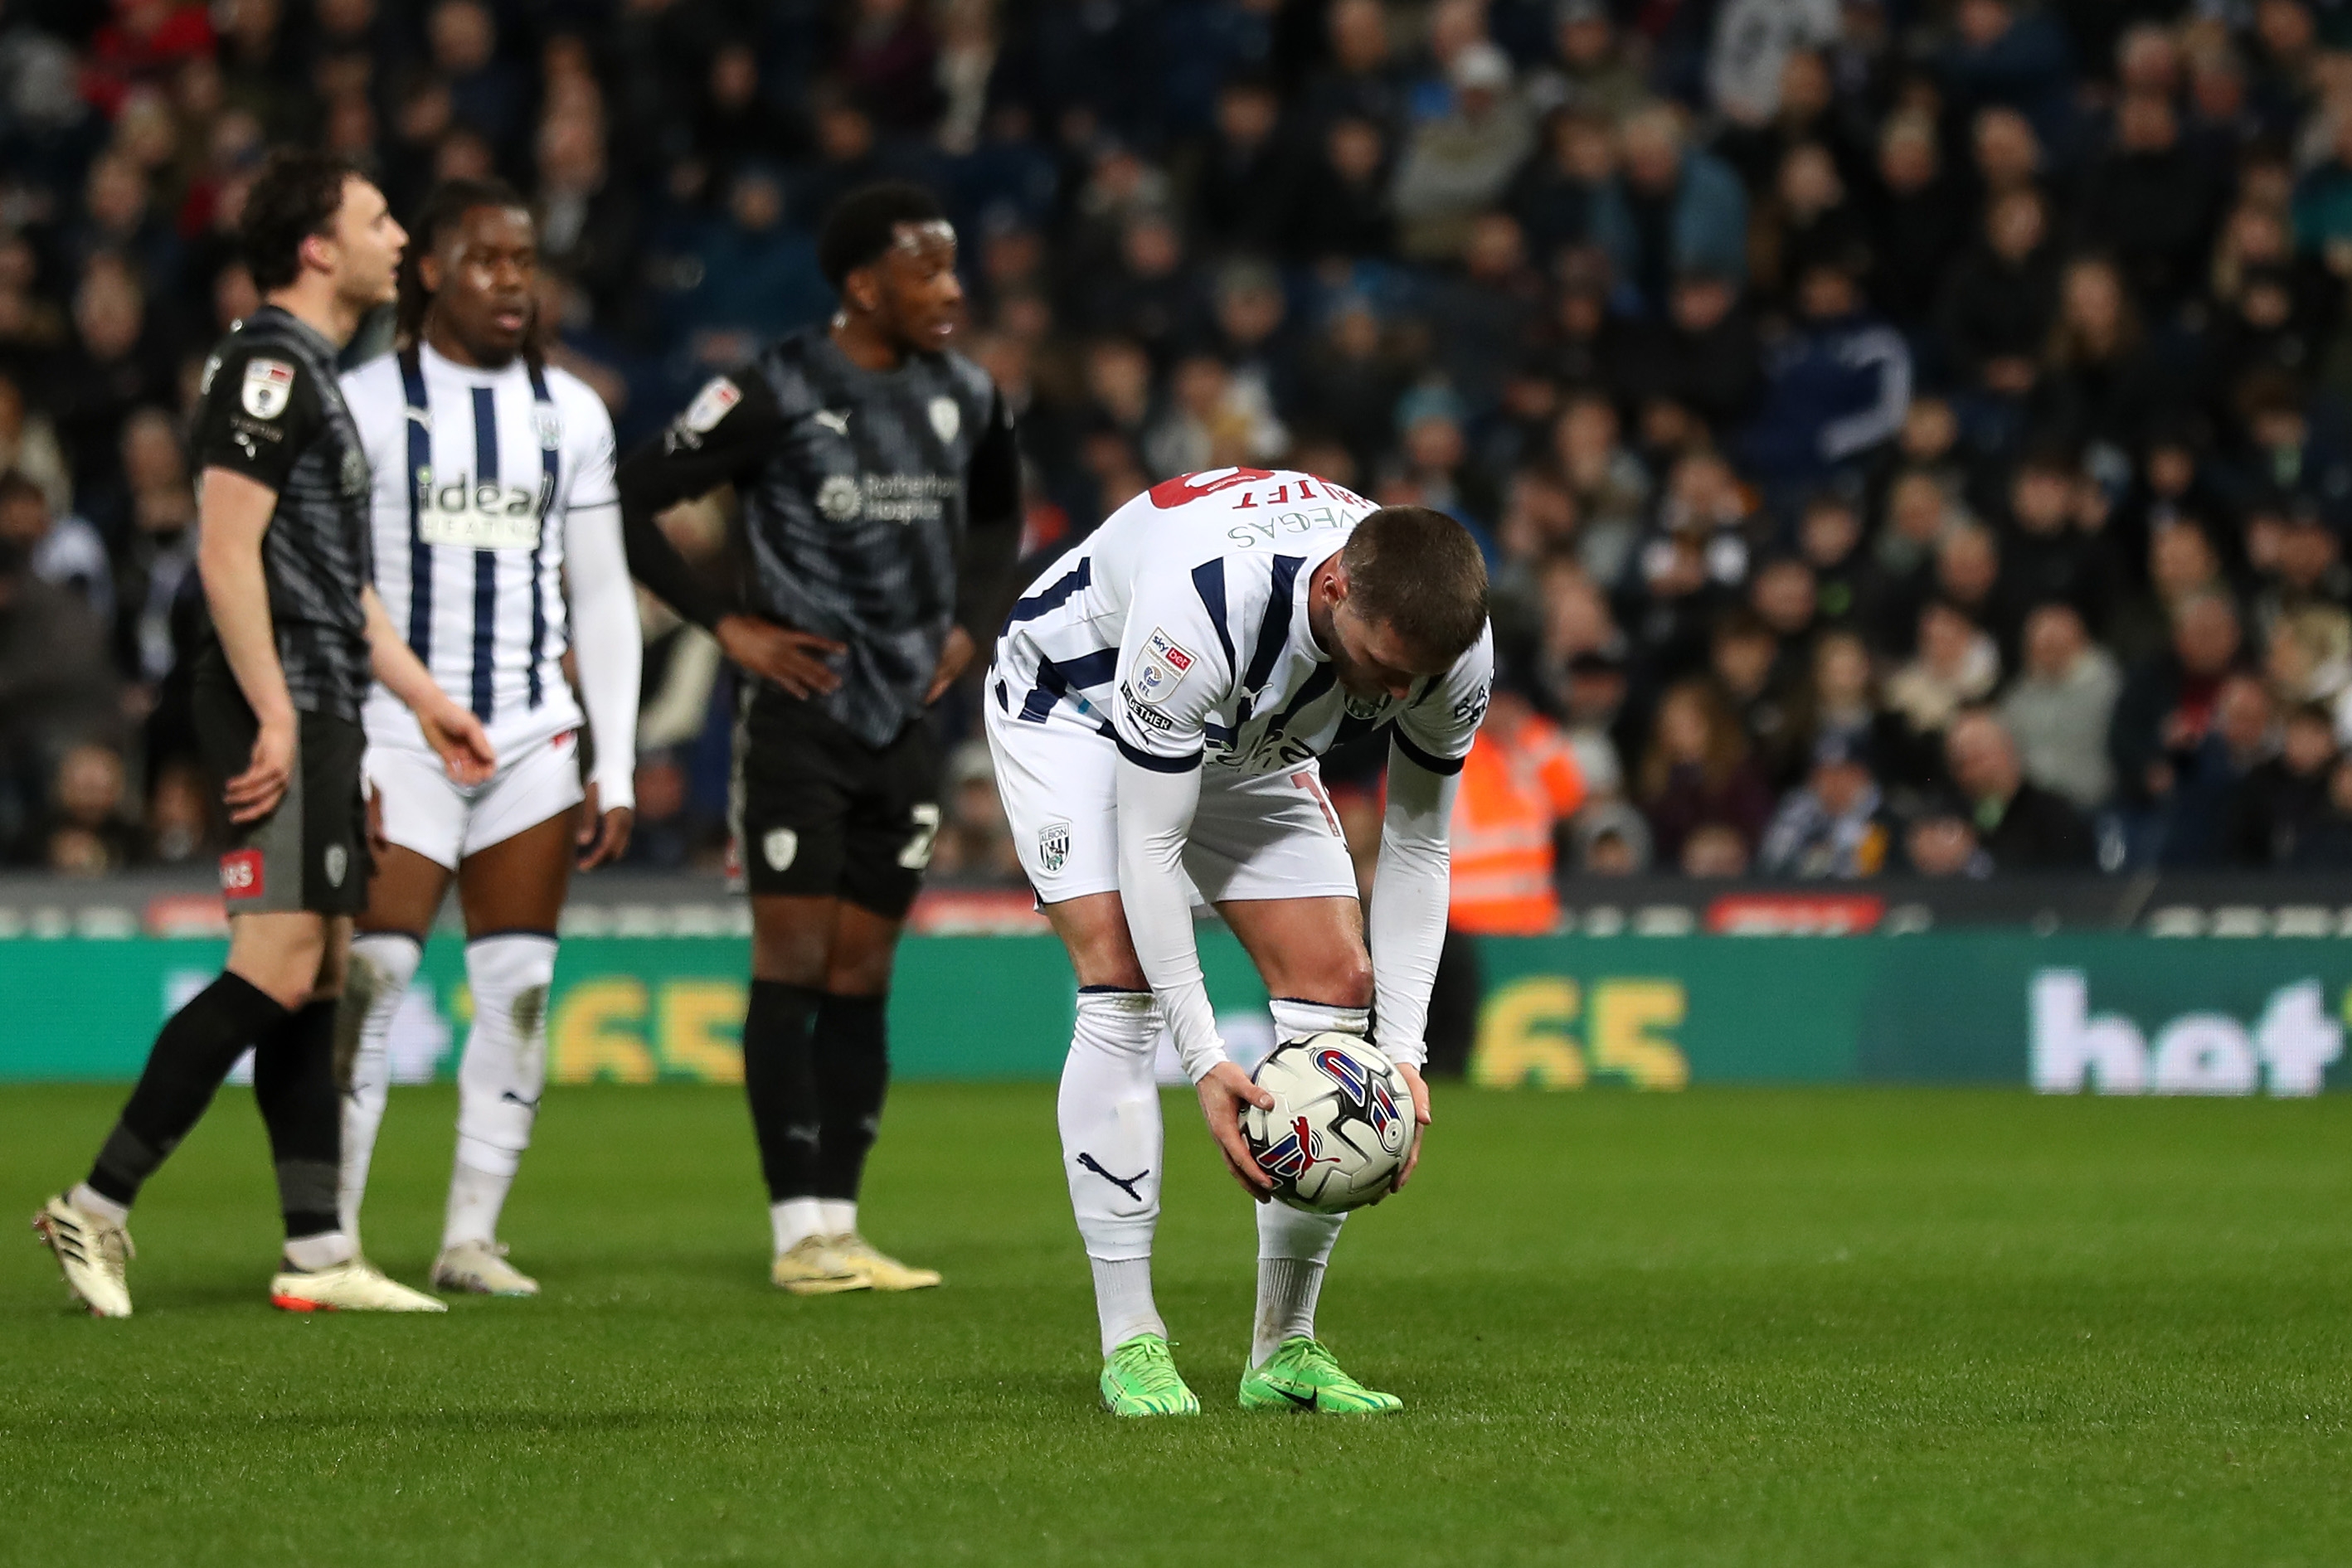 John Swift places the ball on the penalty spot against Rotherham United at The Hawthorns